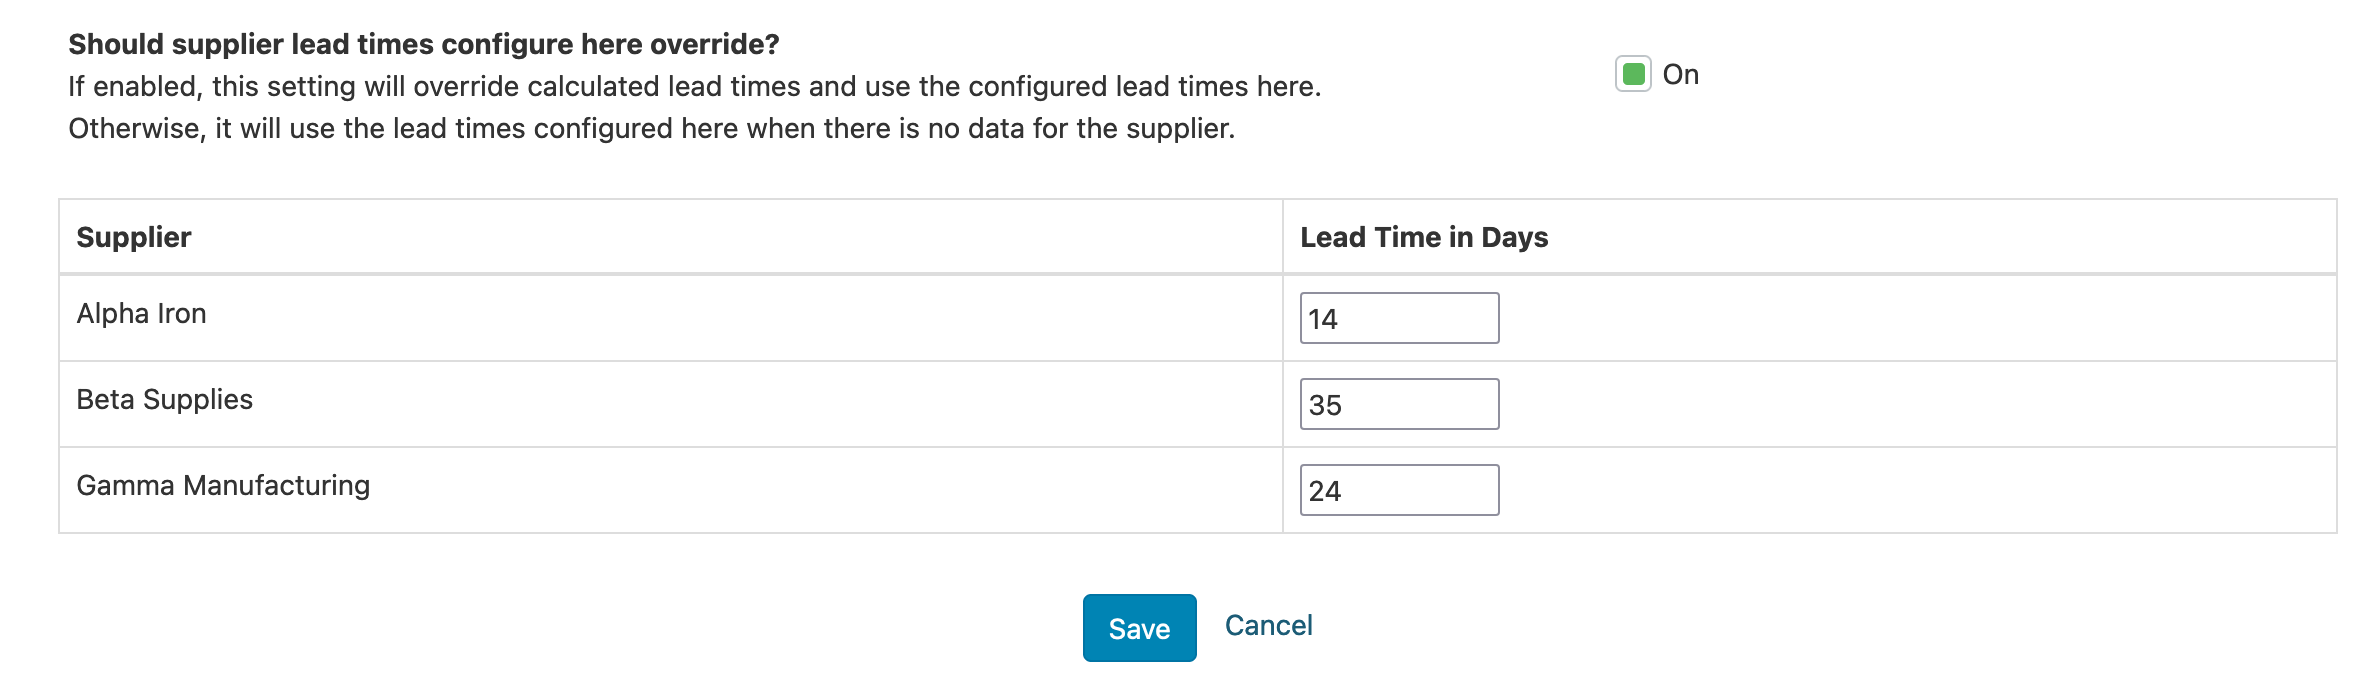 Configuring Supplier Lead Times